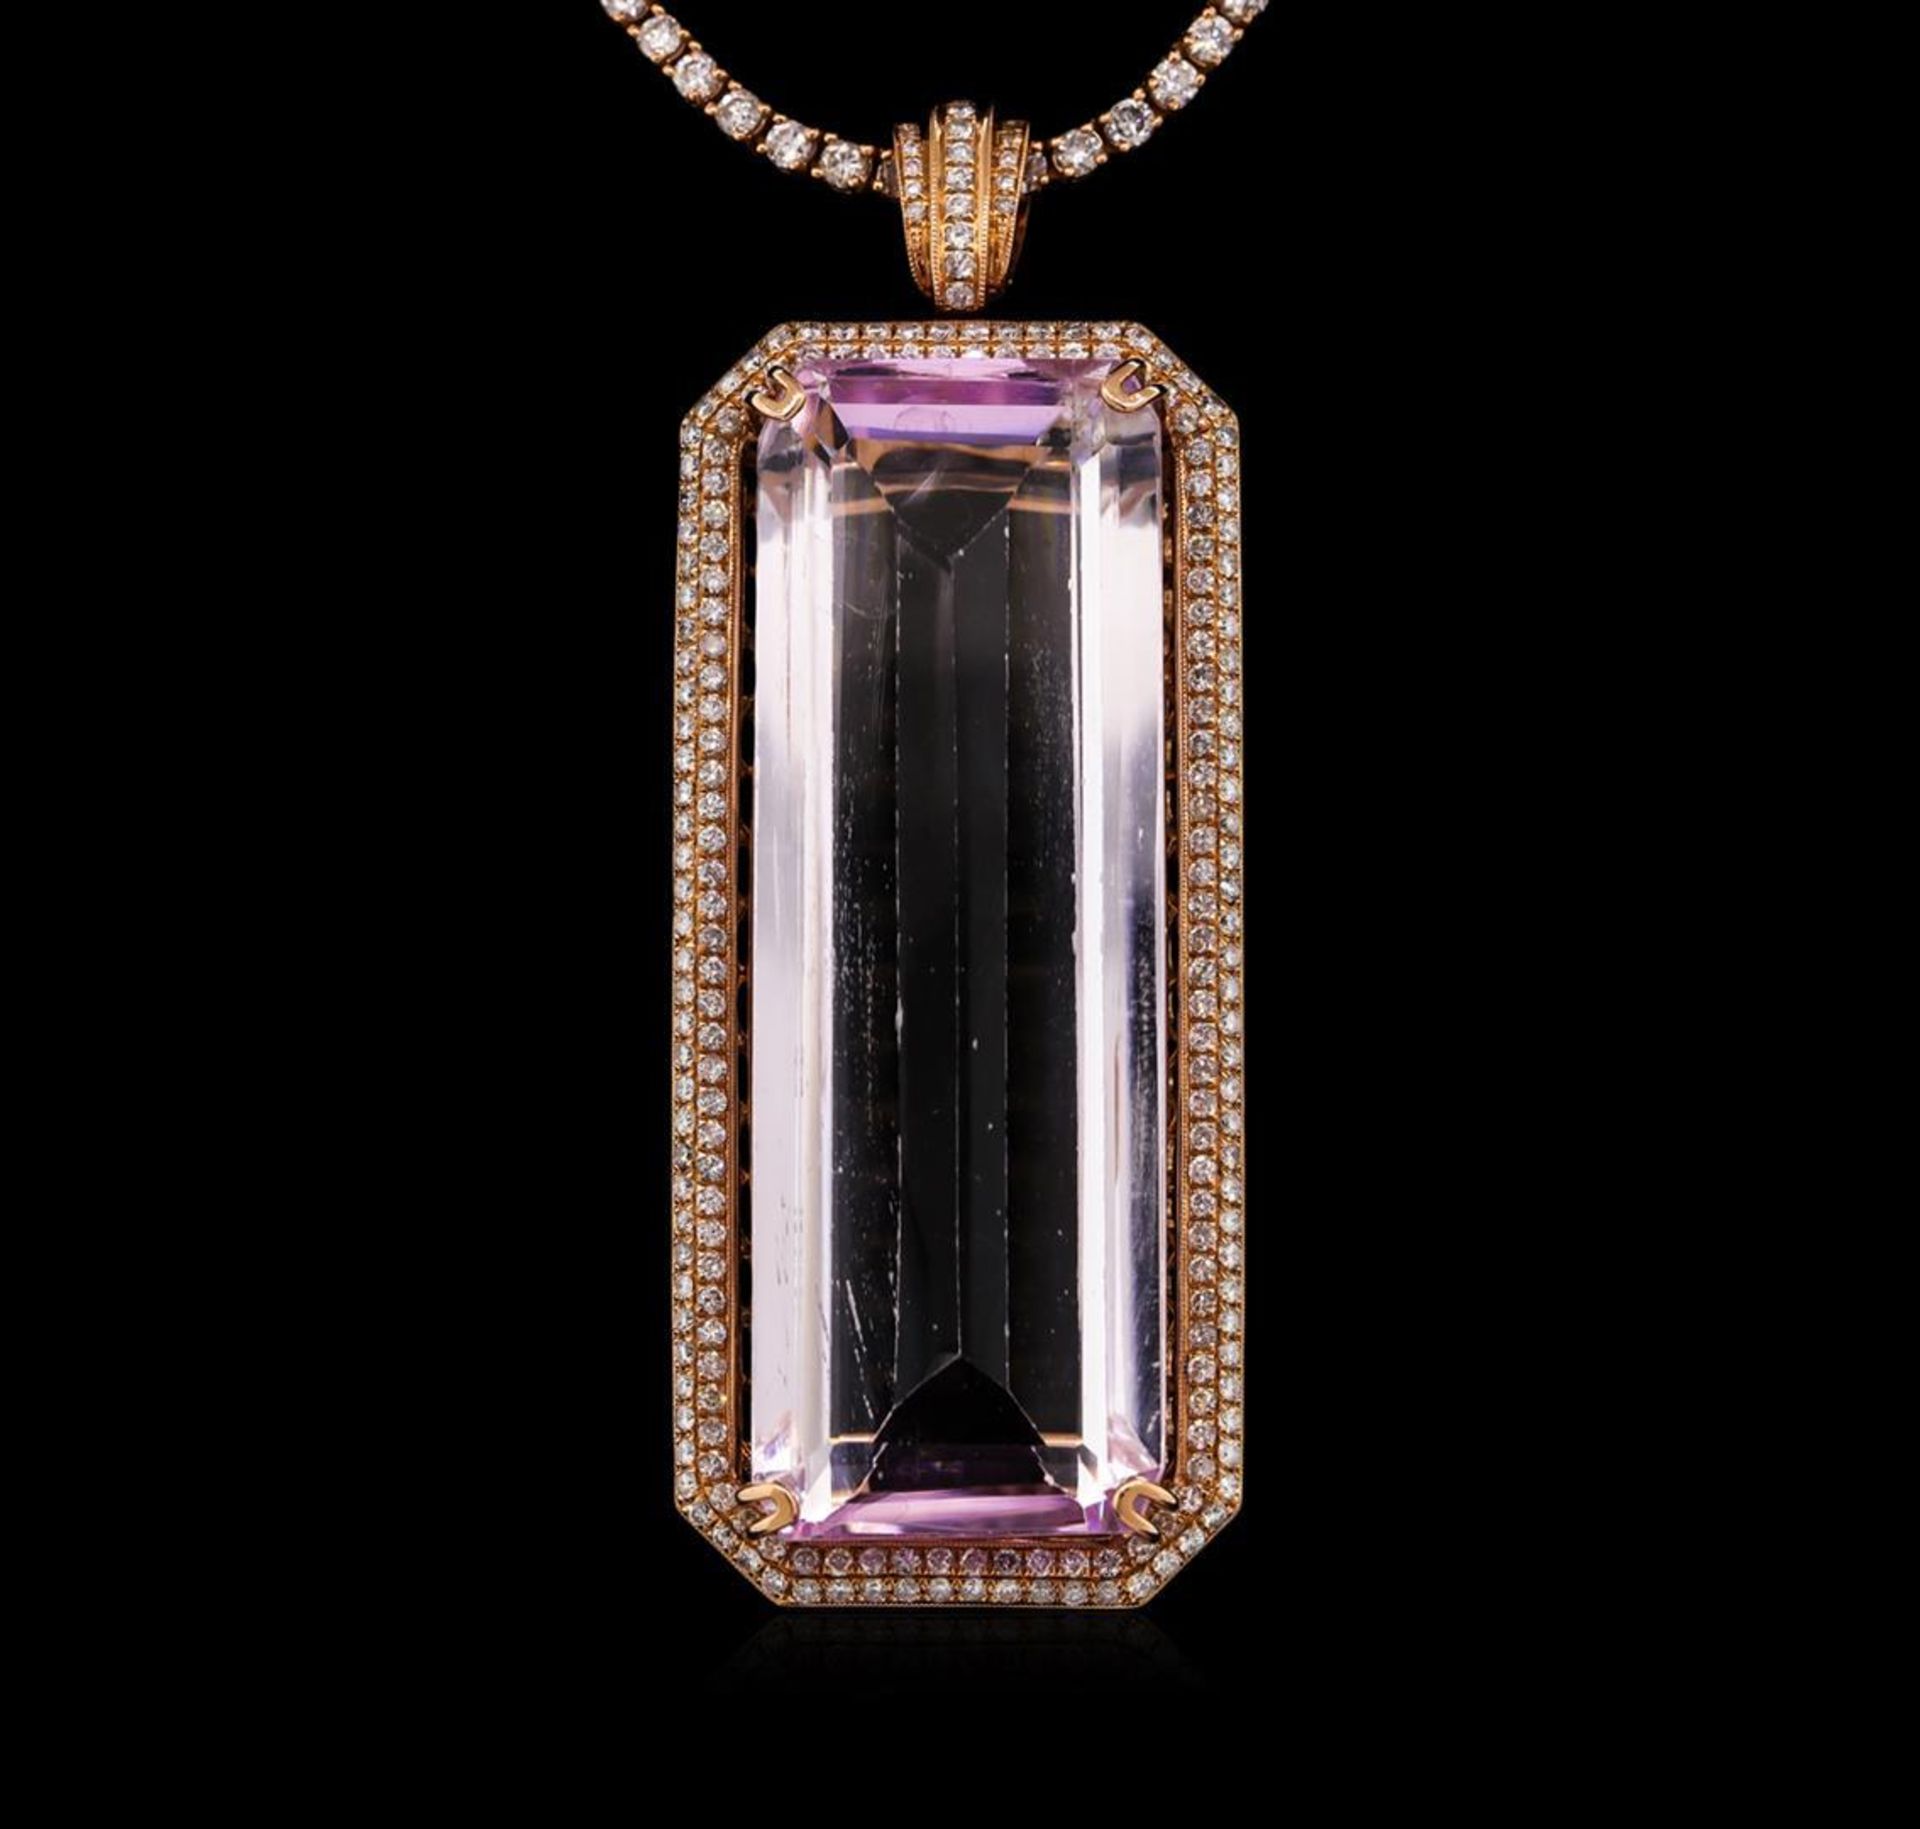 14KT Rose Gold GIA Certified 162.70 ctw Kunzite and Diamond Pendant With Chain - Image 2 of 5